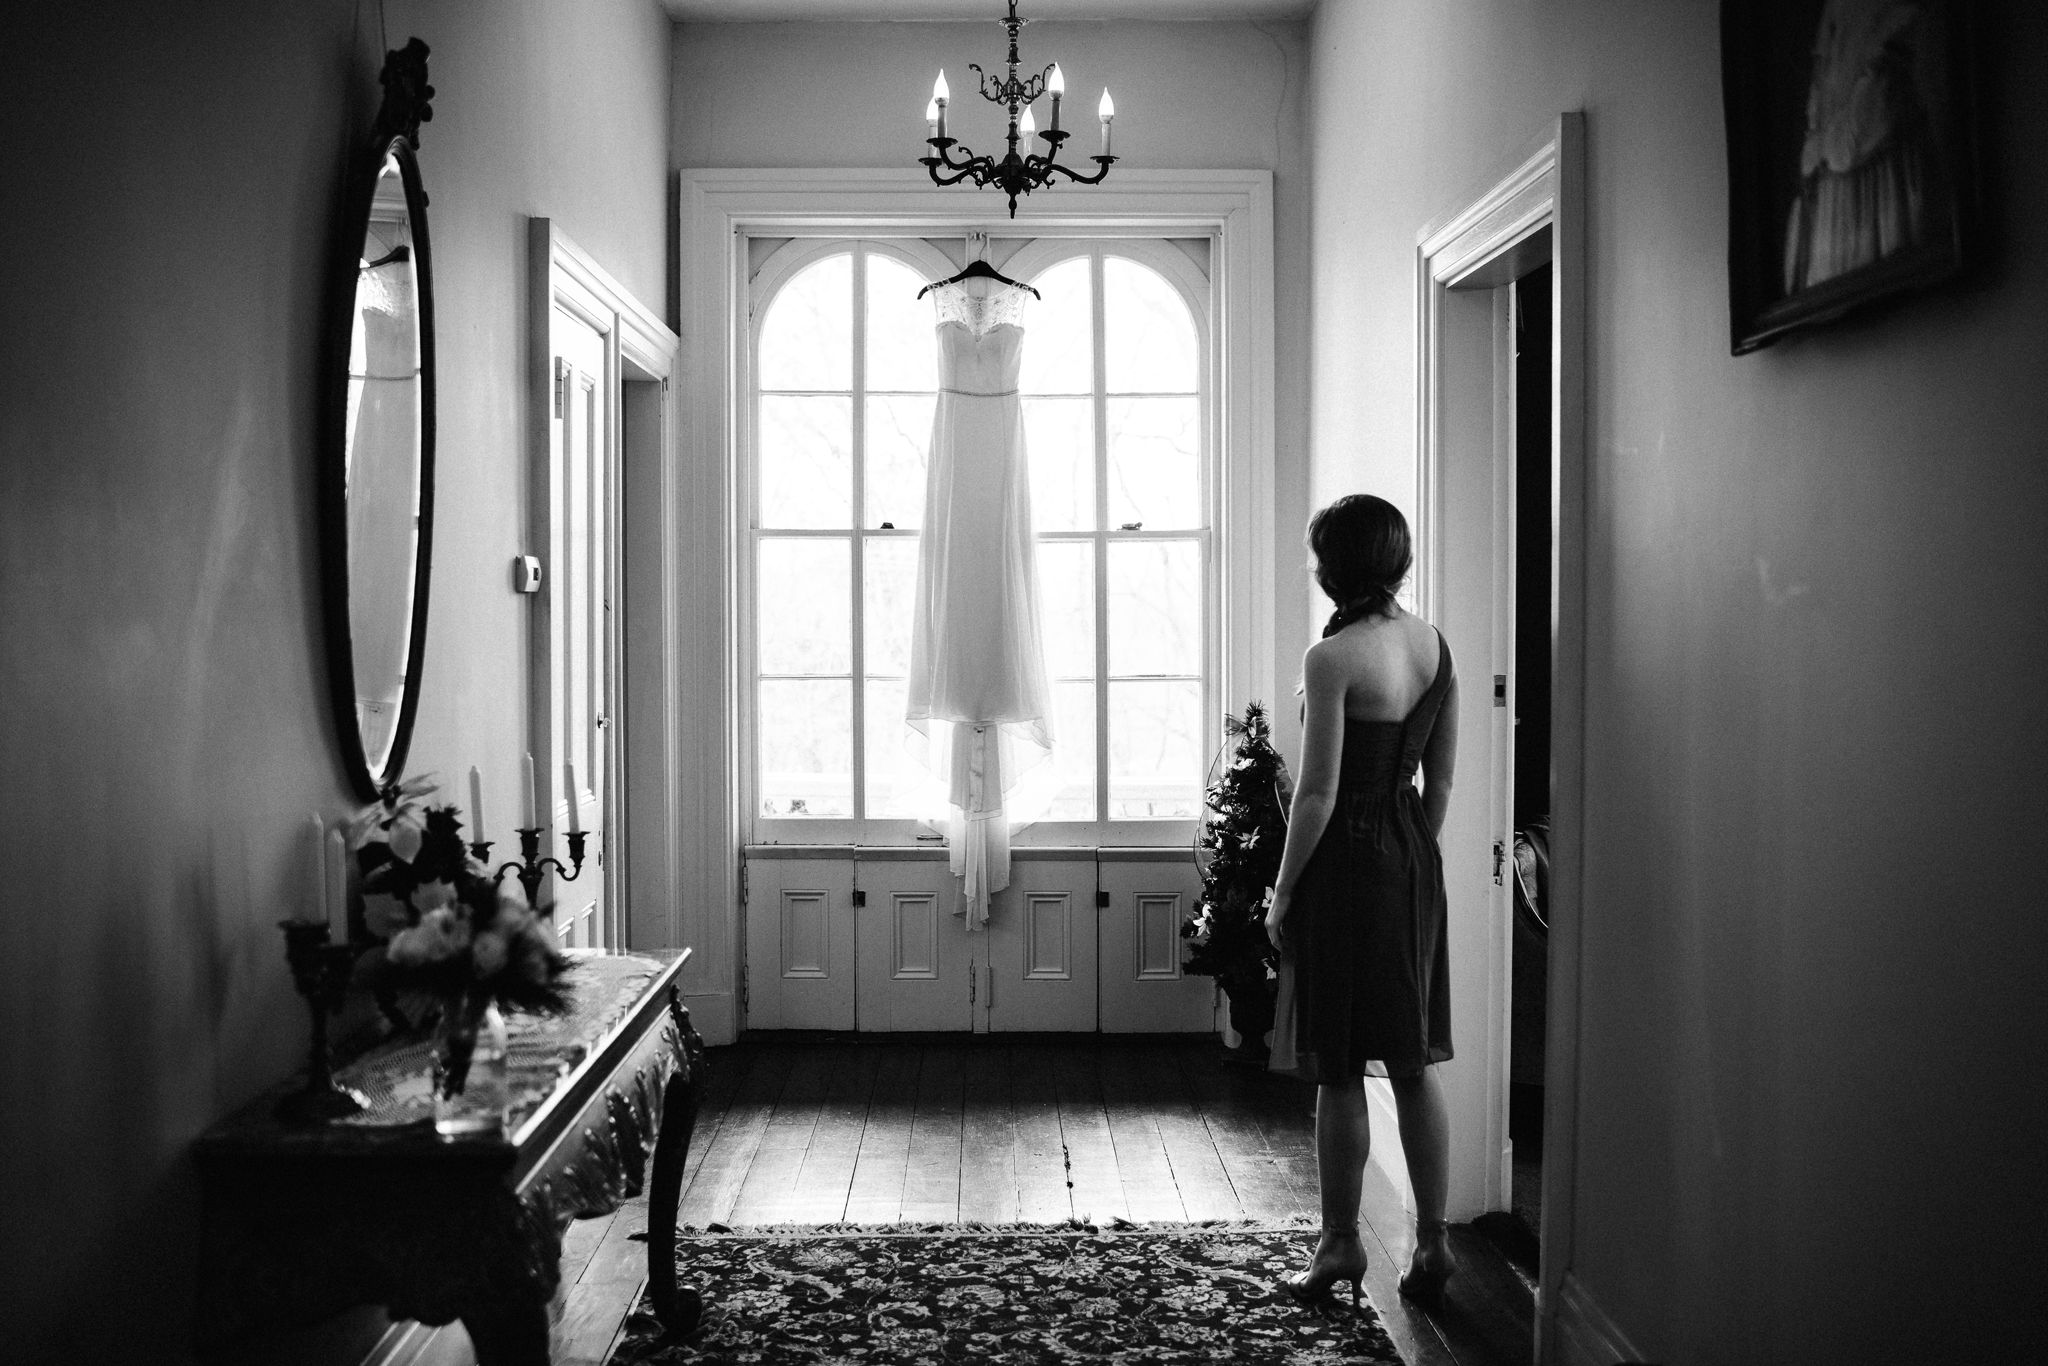 The bride's sister is standing in the doorway, admiring the simple wedding gown hanging in the window at the end of the hall at the Larimore House. 